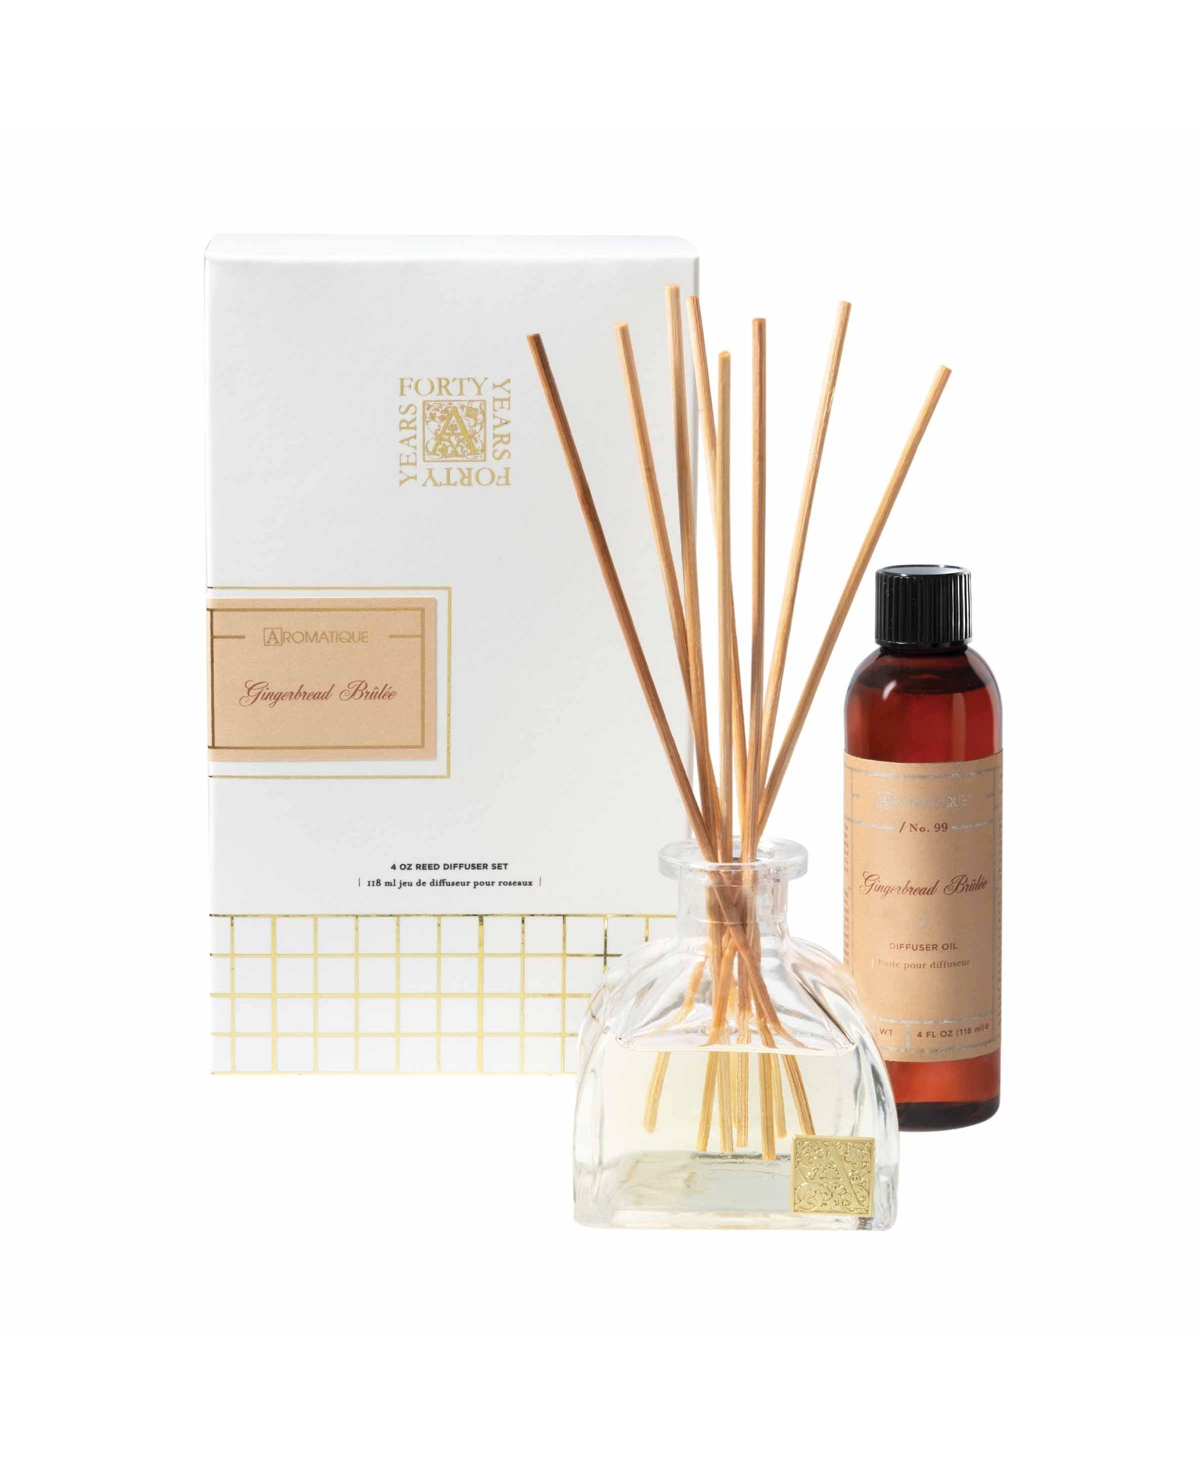 40th Anniversary Gingerbread Brulee Reed Diffuser Set